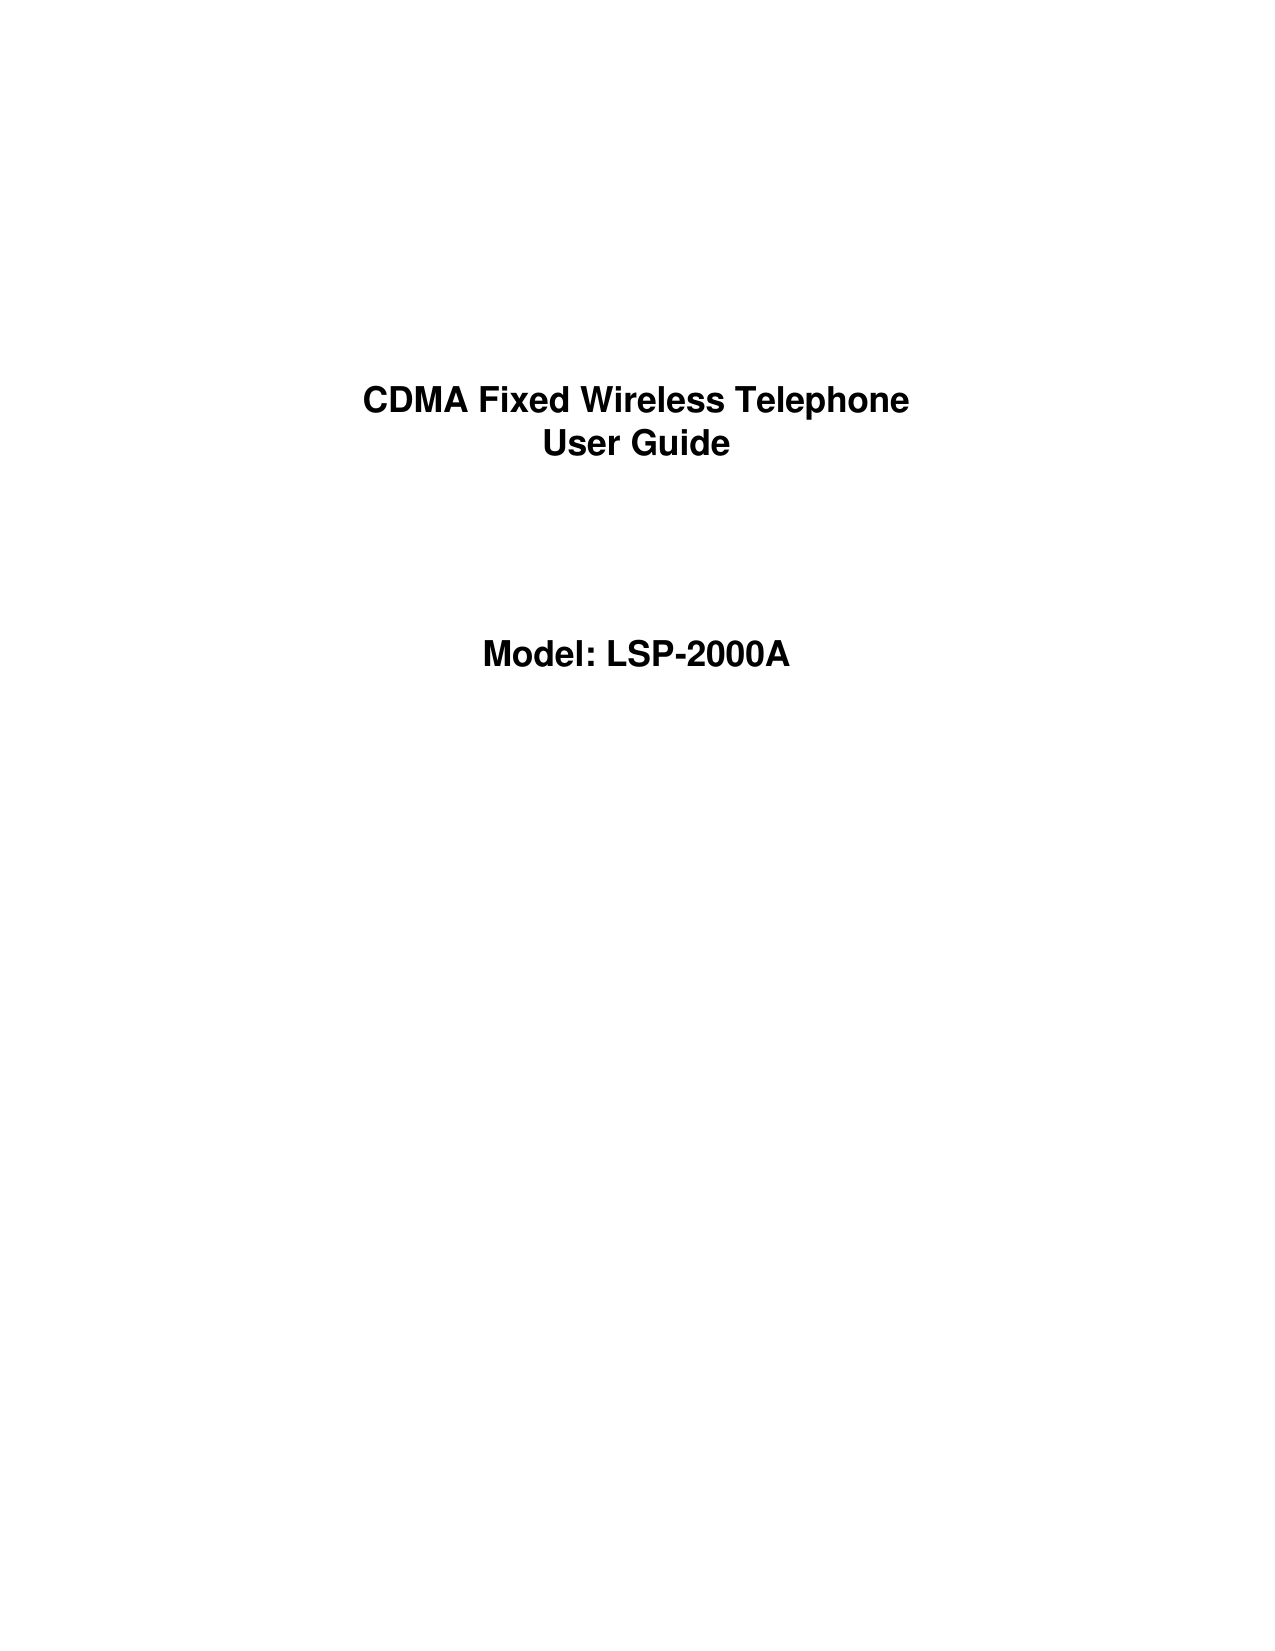 CDMA Fixed Wireless Telephone User Guide     Model: LSP-2000A 